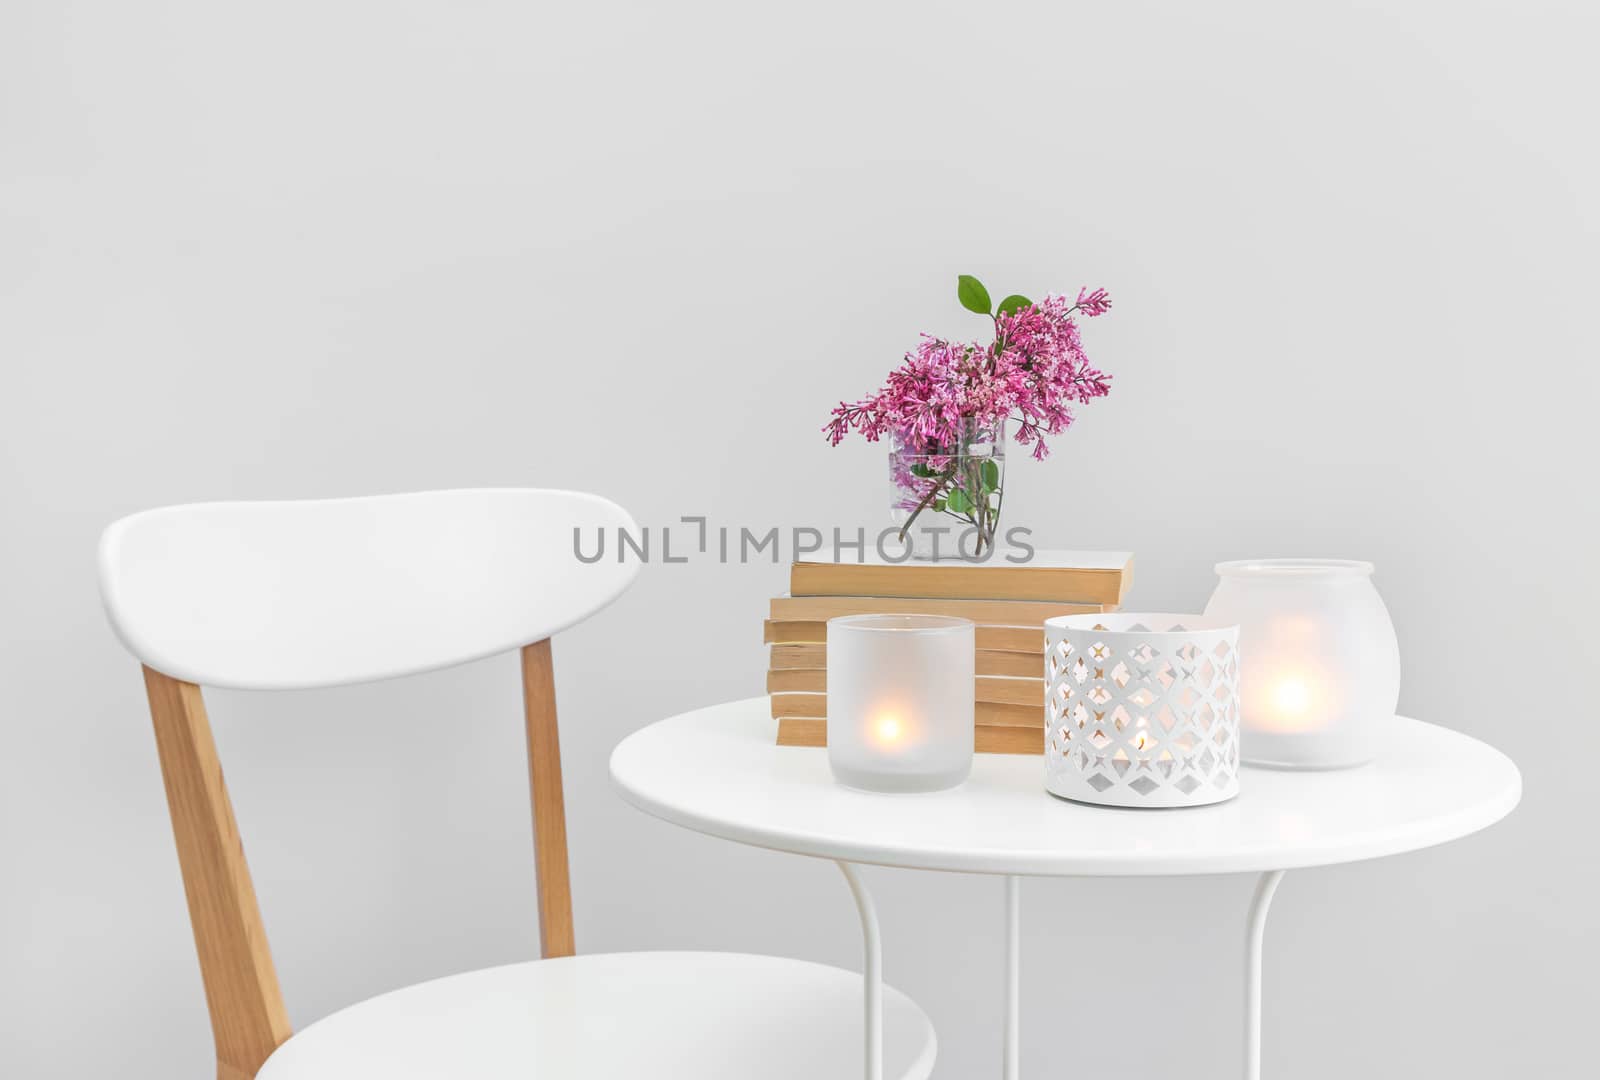 Candle lights, books and flowers on a white table. Elegant home decor.